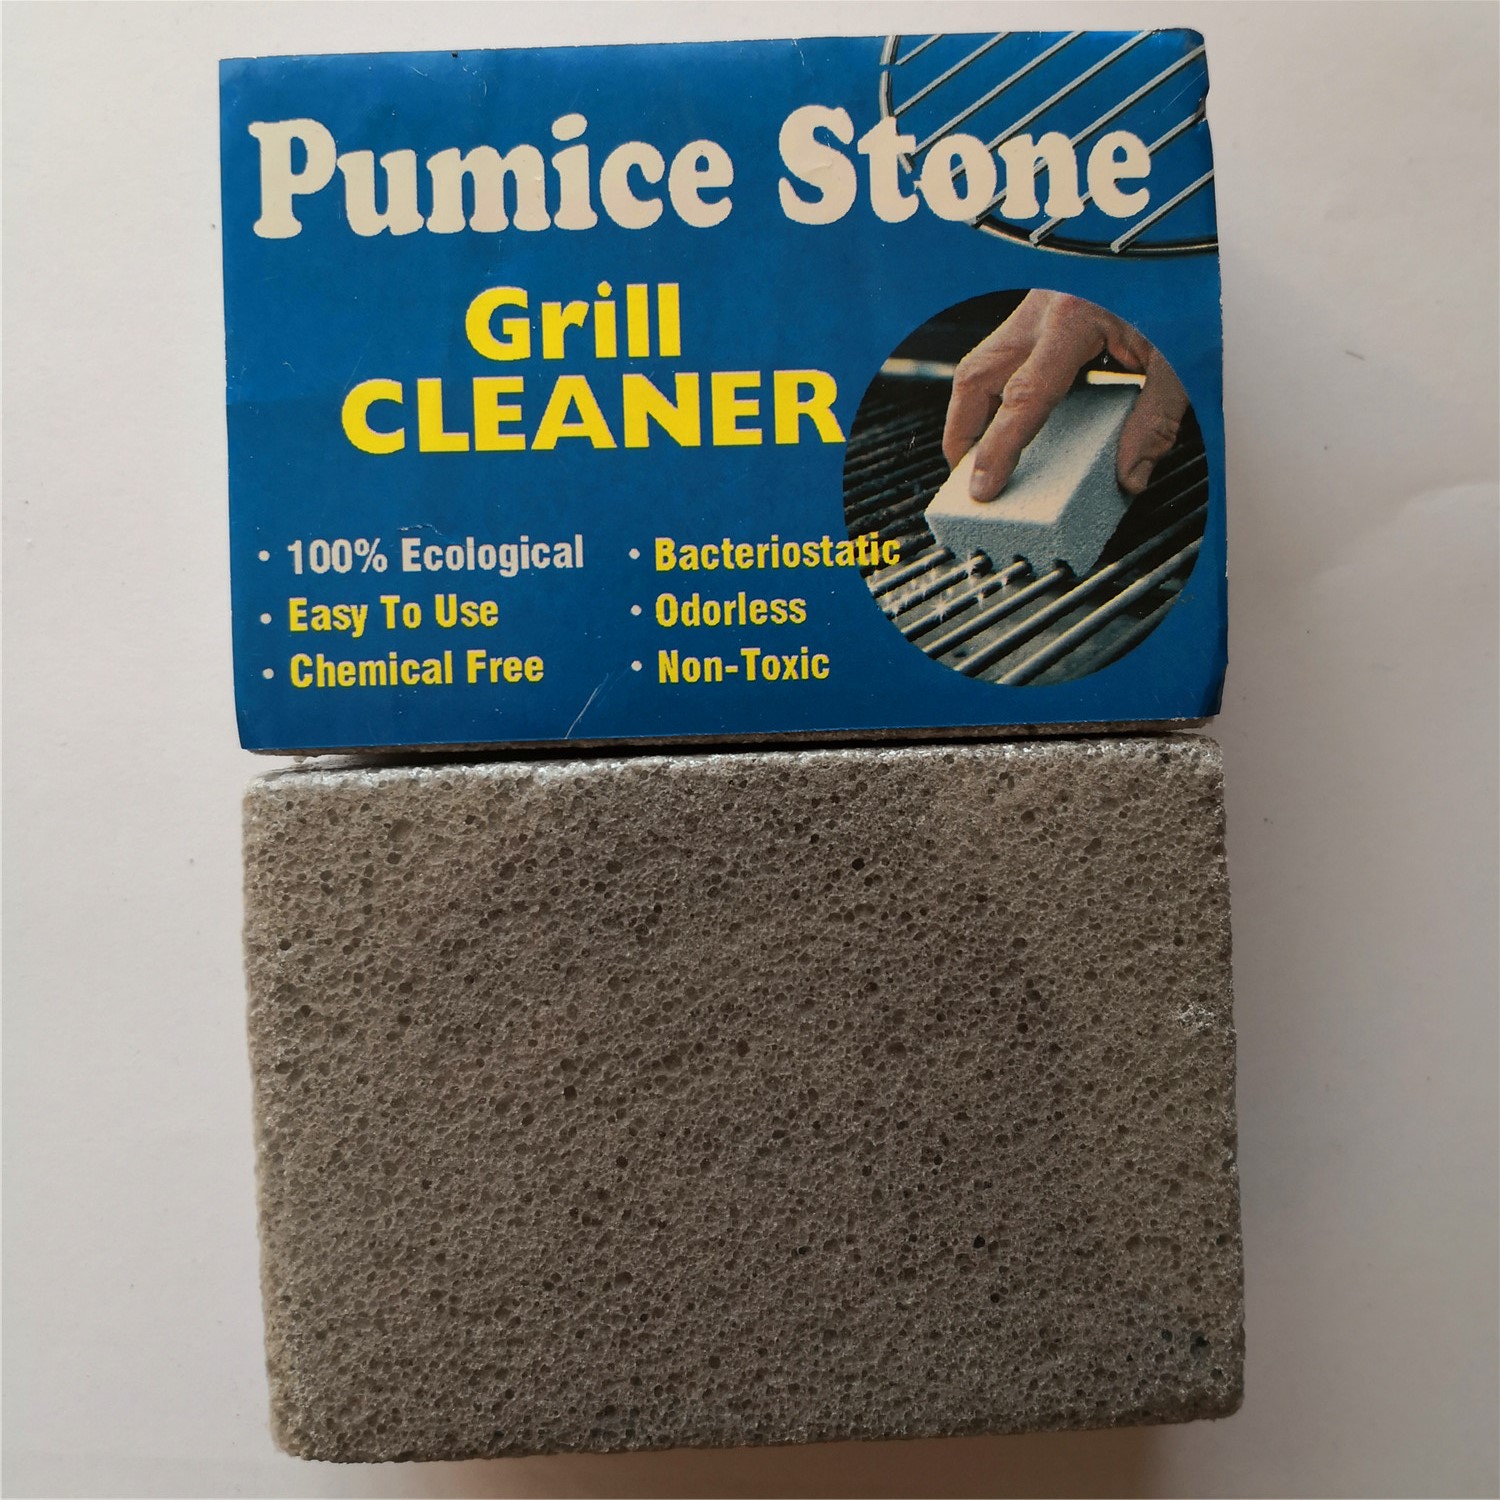 grill stone,Grill Brick For cleaning Girt